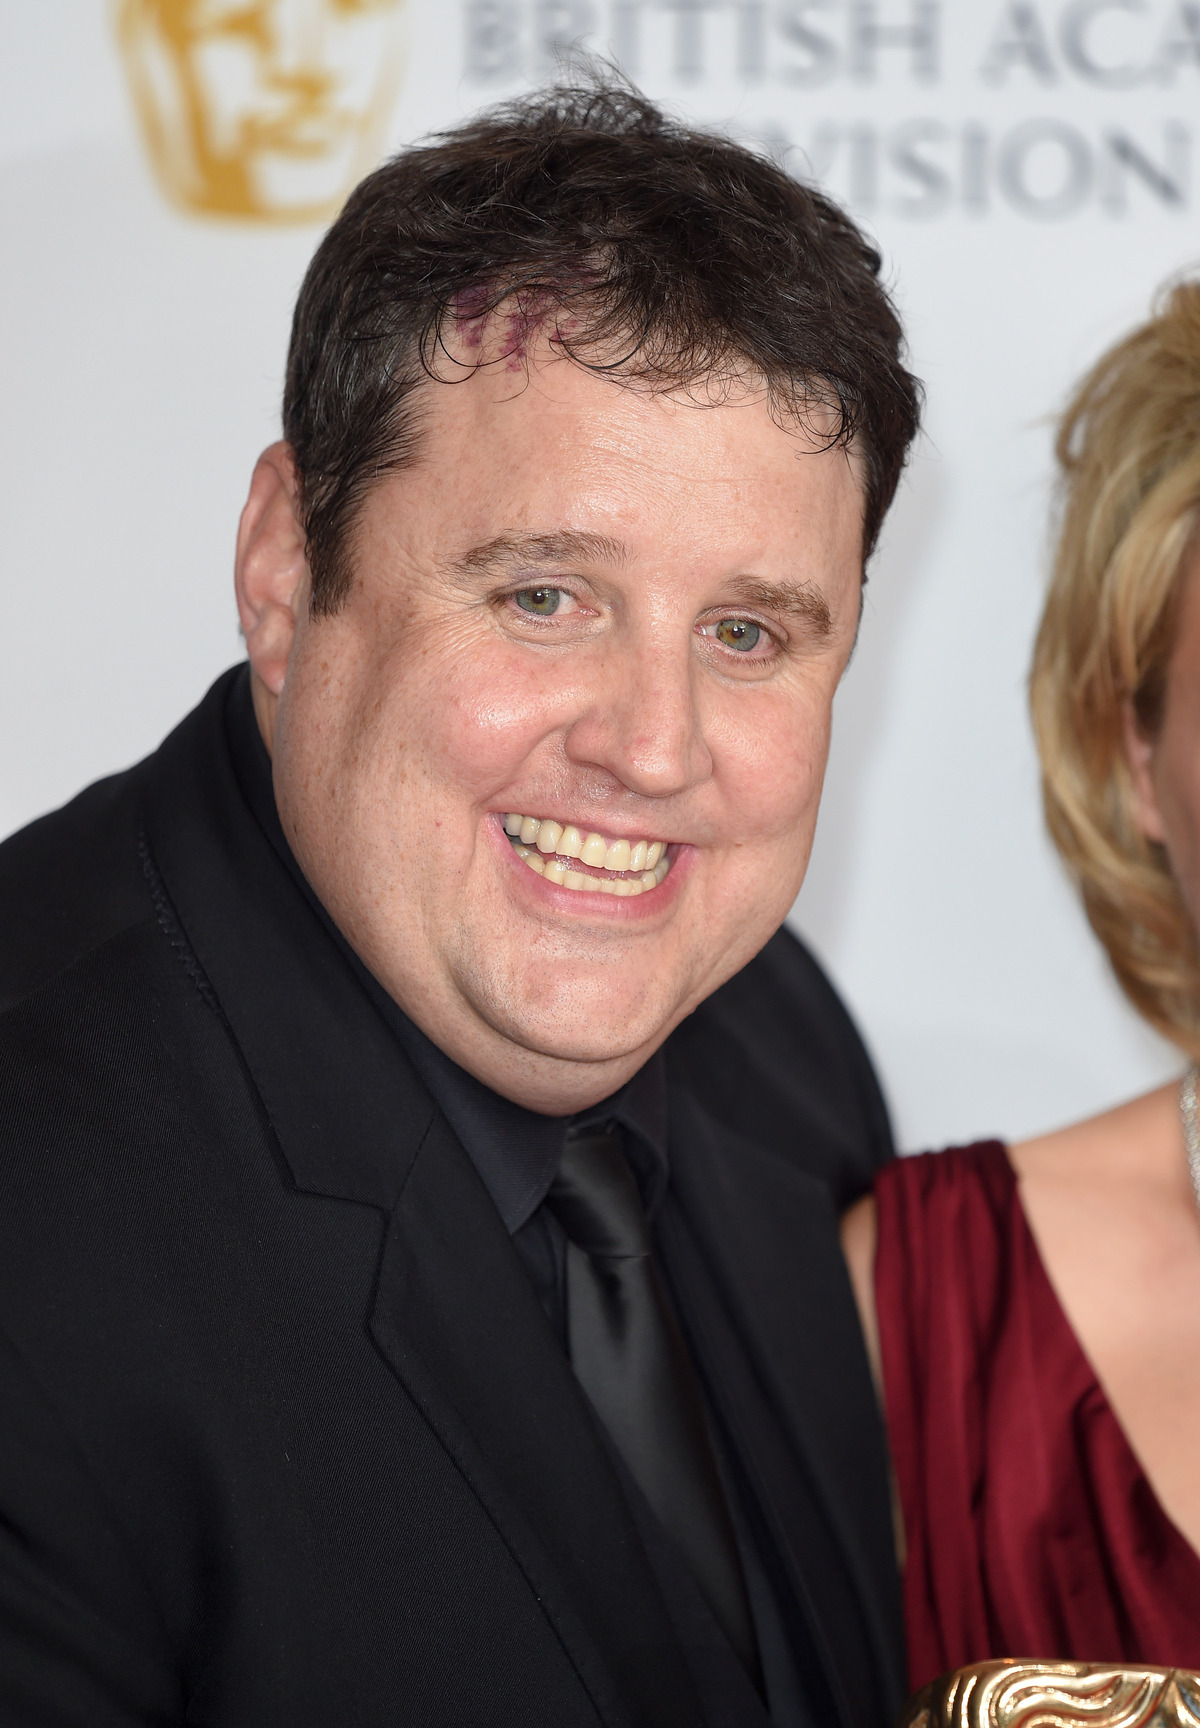 Peter Kay defends old Little Britain sketches after being asked to take part in show